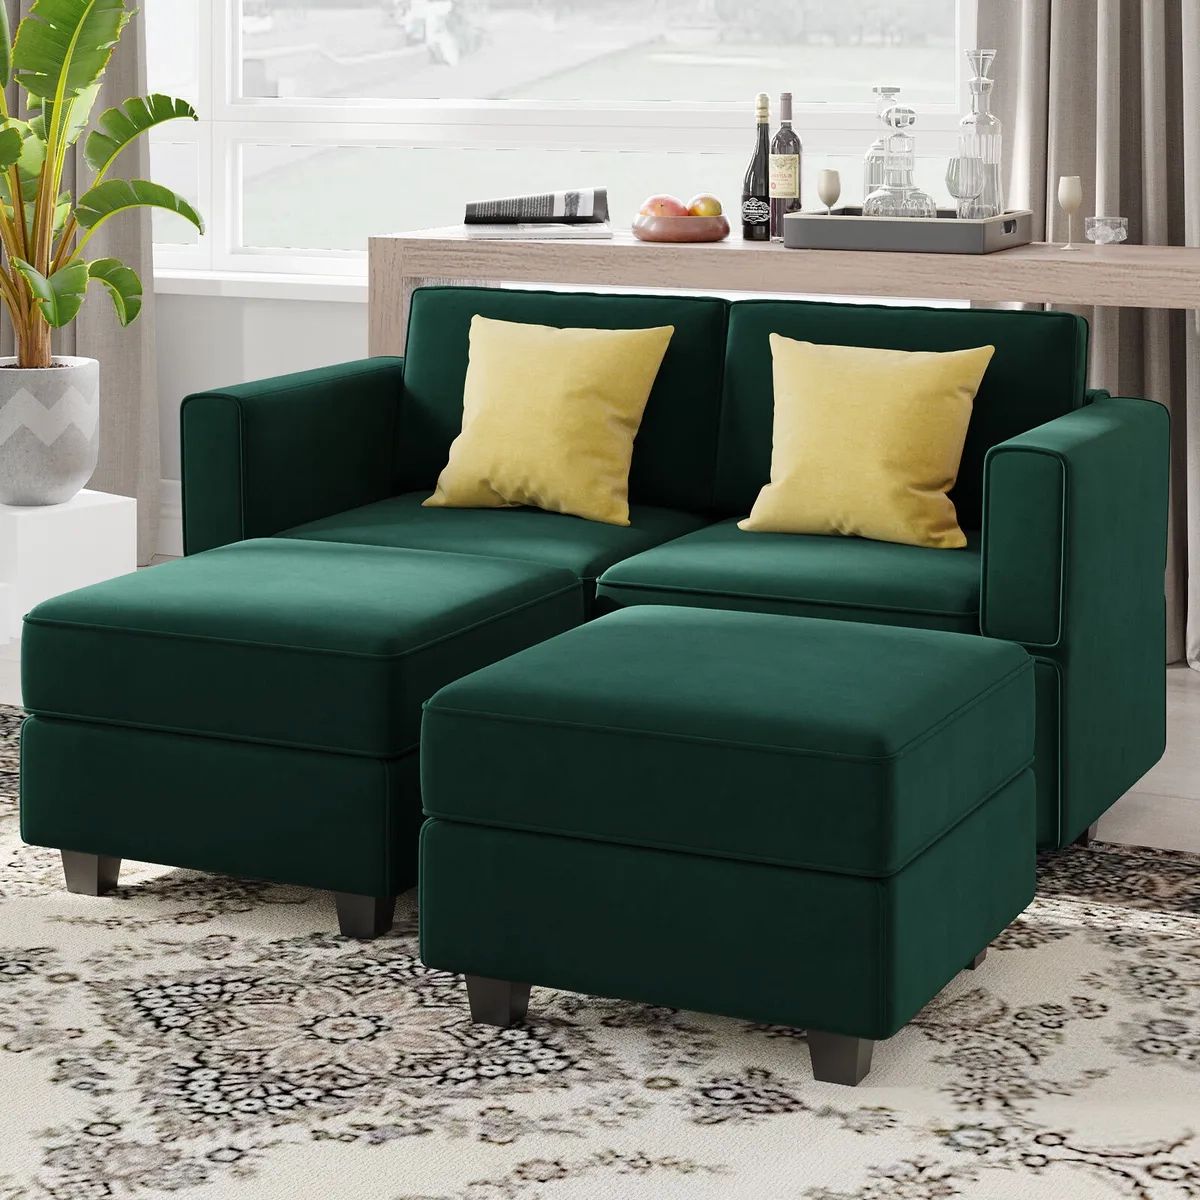 Belffin Modular Sectional Sofa With Storage Oversized Couch Bed Velvet Green  | Ebay Within Green Velvet Modular Sectionals (Photo 13 of 15)